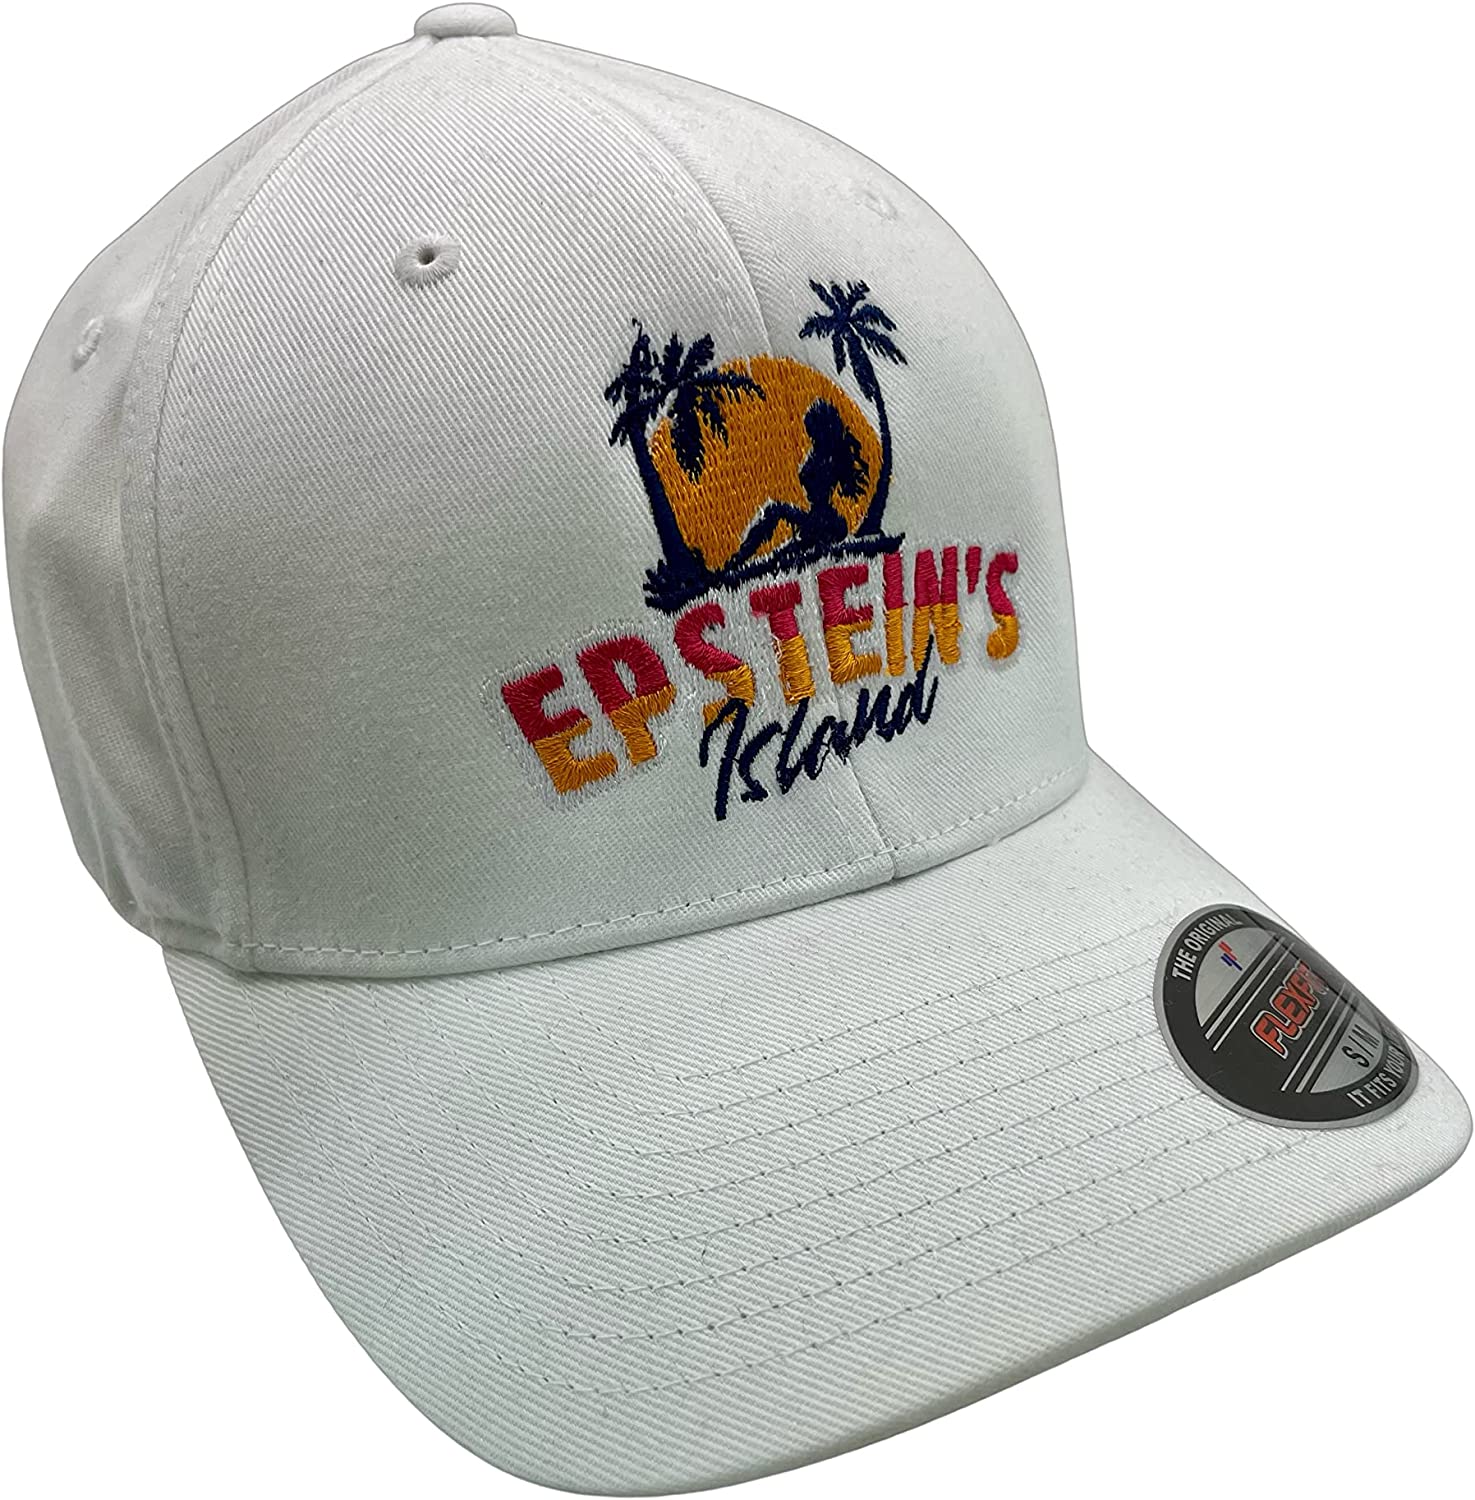 Epsteins Island – White, Flex Fit, Fitted Hat by Pats Hats